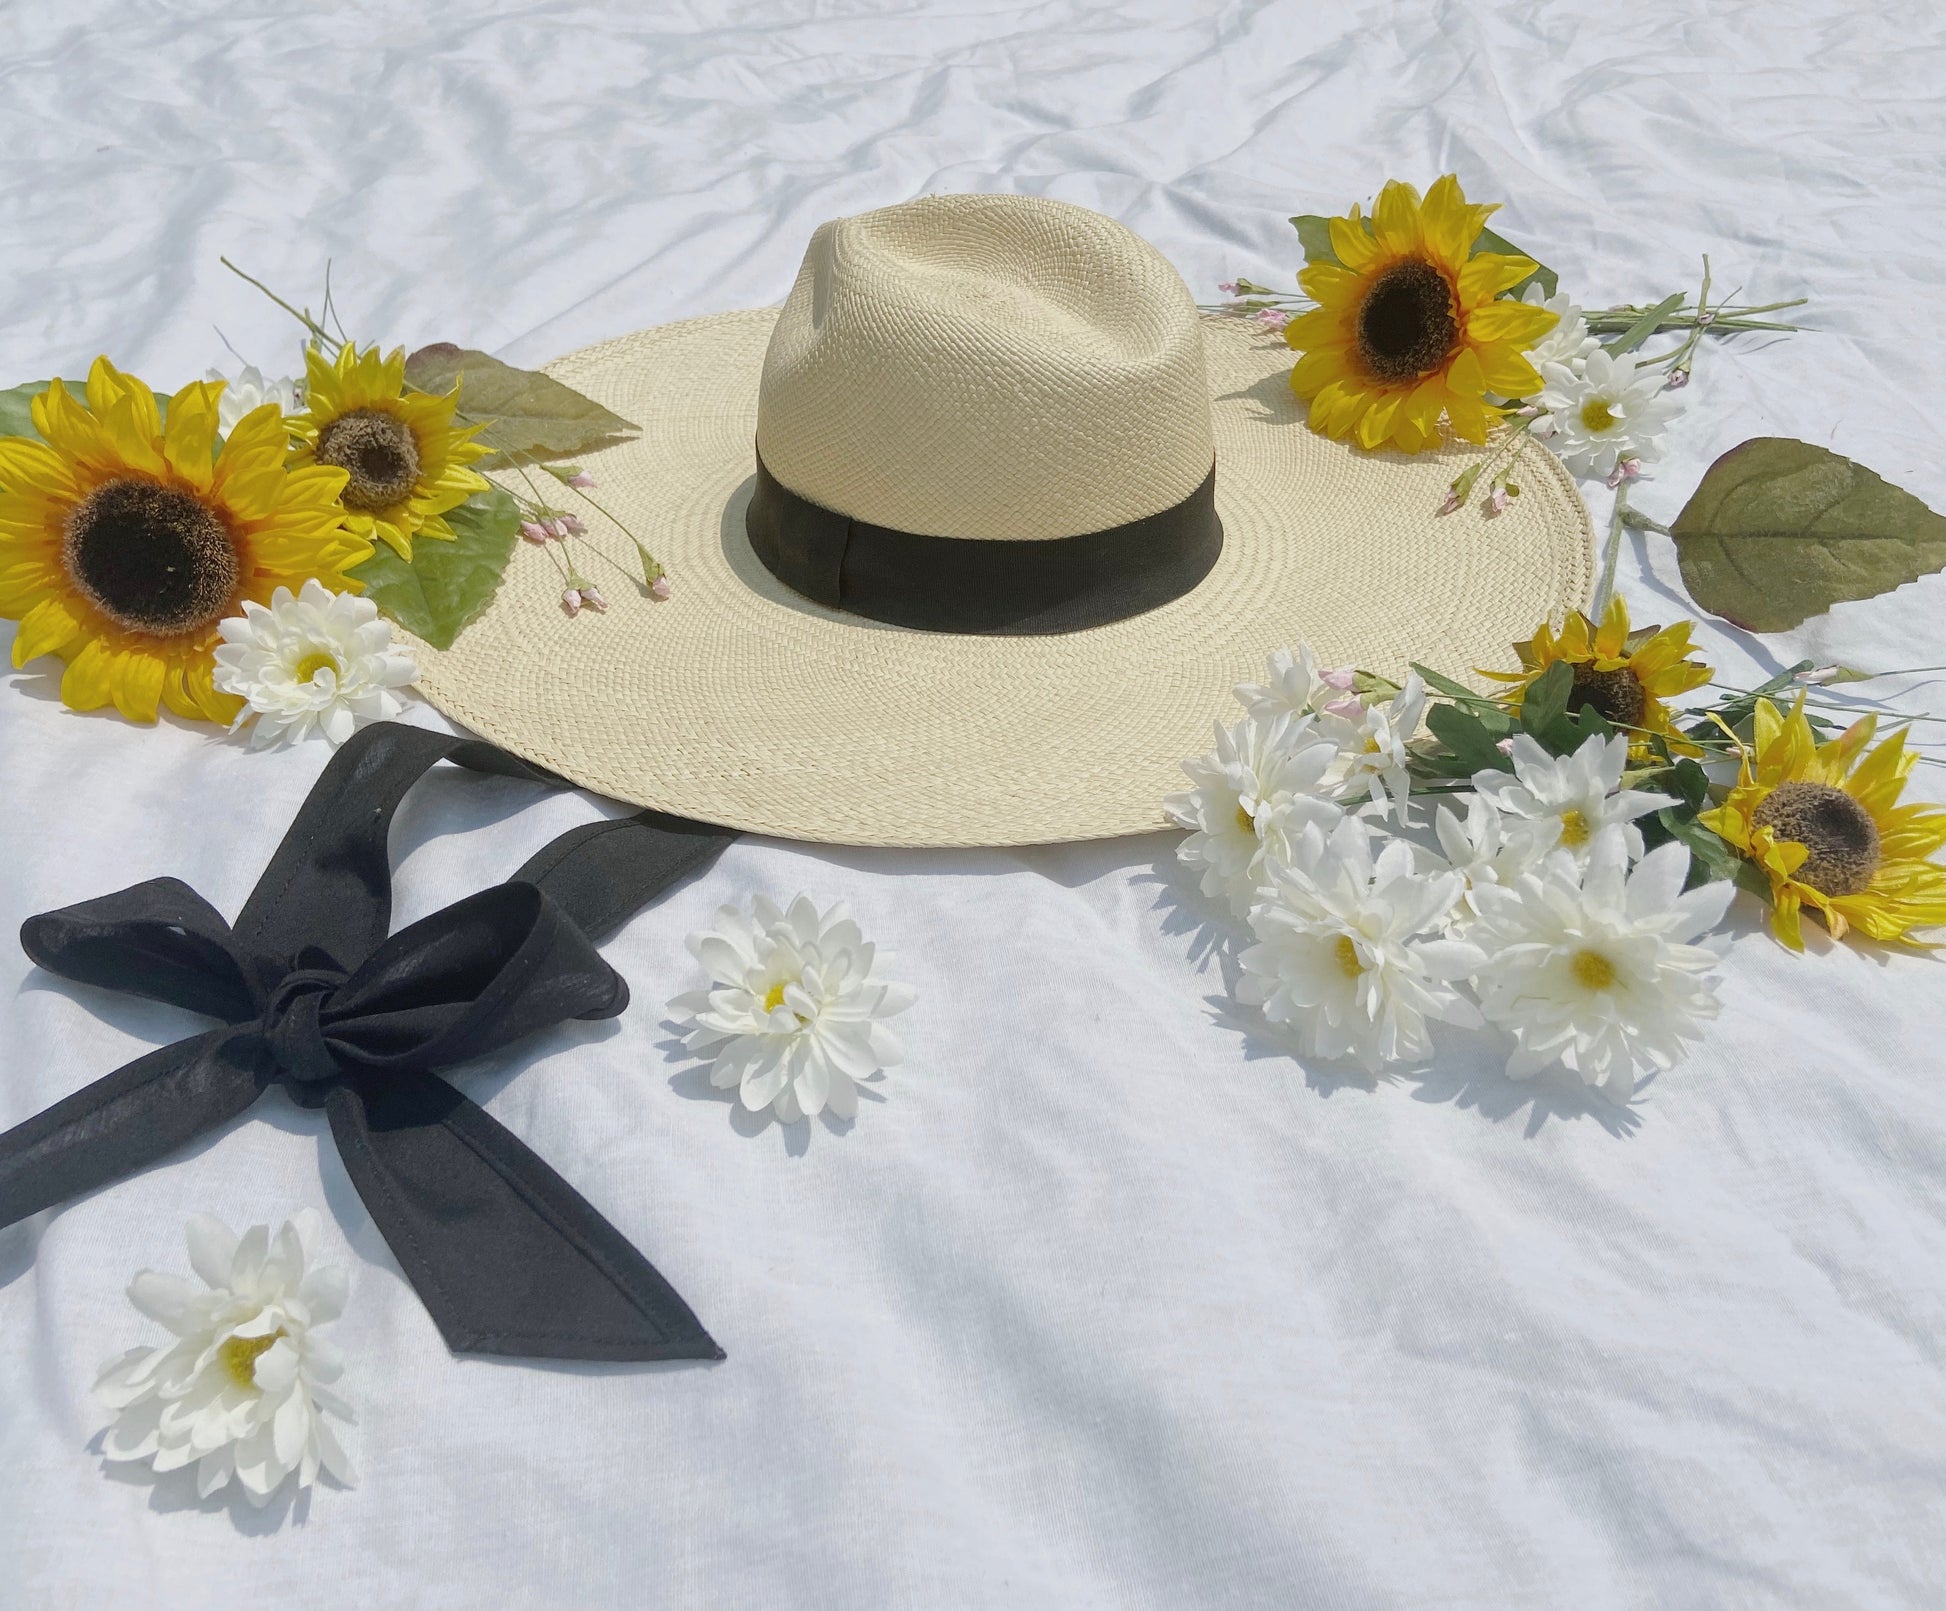 Natural Straw Sun Hat With Sunflowers & Green Band